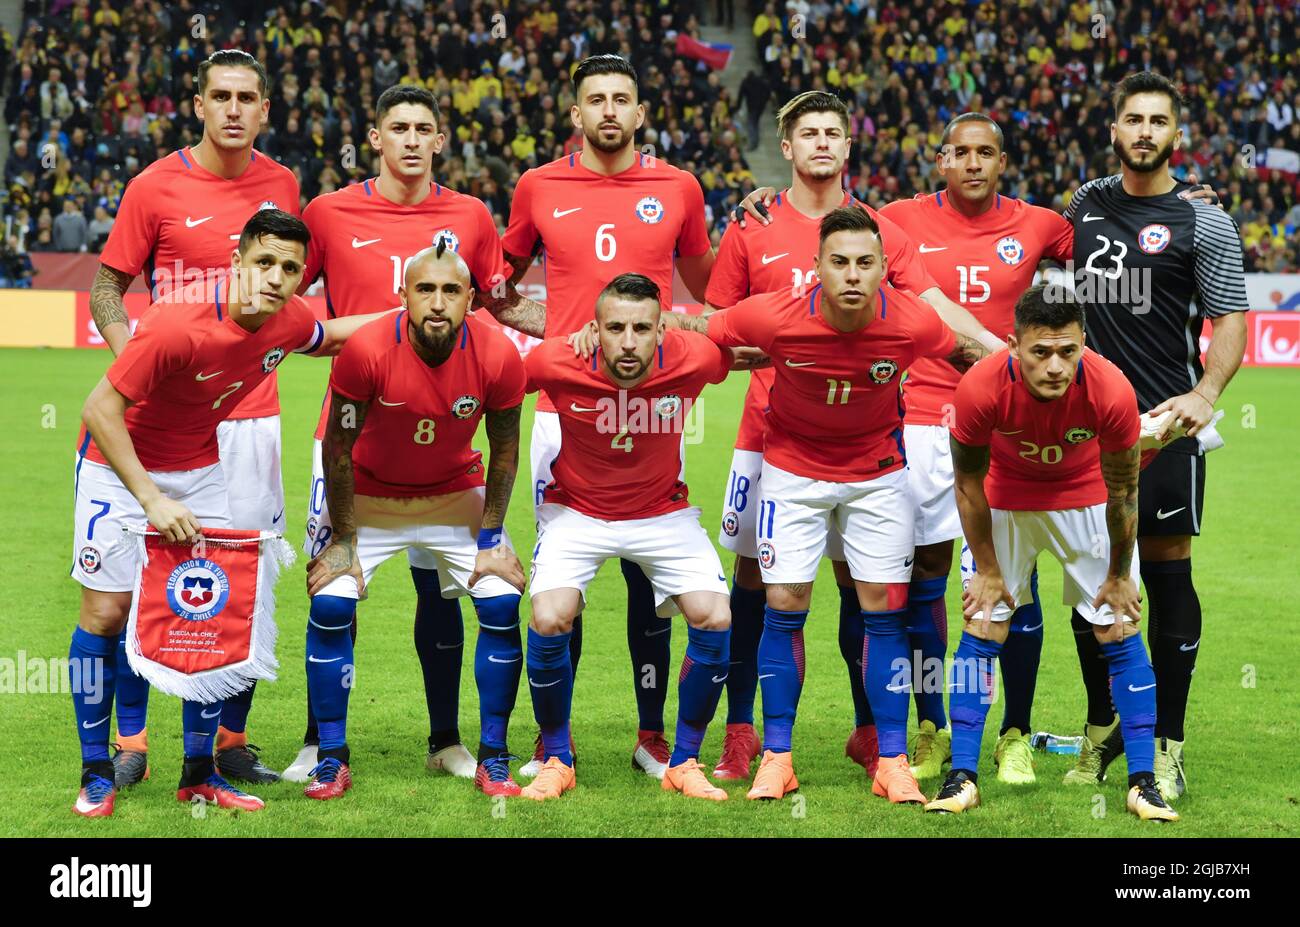 Chilean players pose for a team photo ahead of the international friendly soccer match between Sweden and Chile at Friends Arena in Solna, Stockholm, on March 24, 2018. Back row from left: Enzo Roco, Pedro Pablo Hernandez, Guillermo Maripan, Angelo Sagal, Jean Beausejour and Johnny Herrera. Front row from left: Alexis Sanchez, Arturo Vidal, Mauricio Isla, Eduardo Vargas and Charles Aranguiz. Photo: Anders Wiklund / TT / 10040  Stock Photo